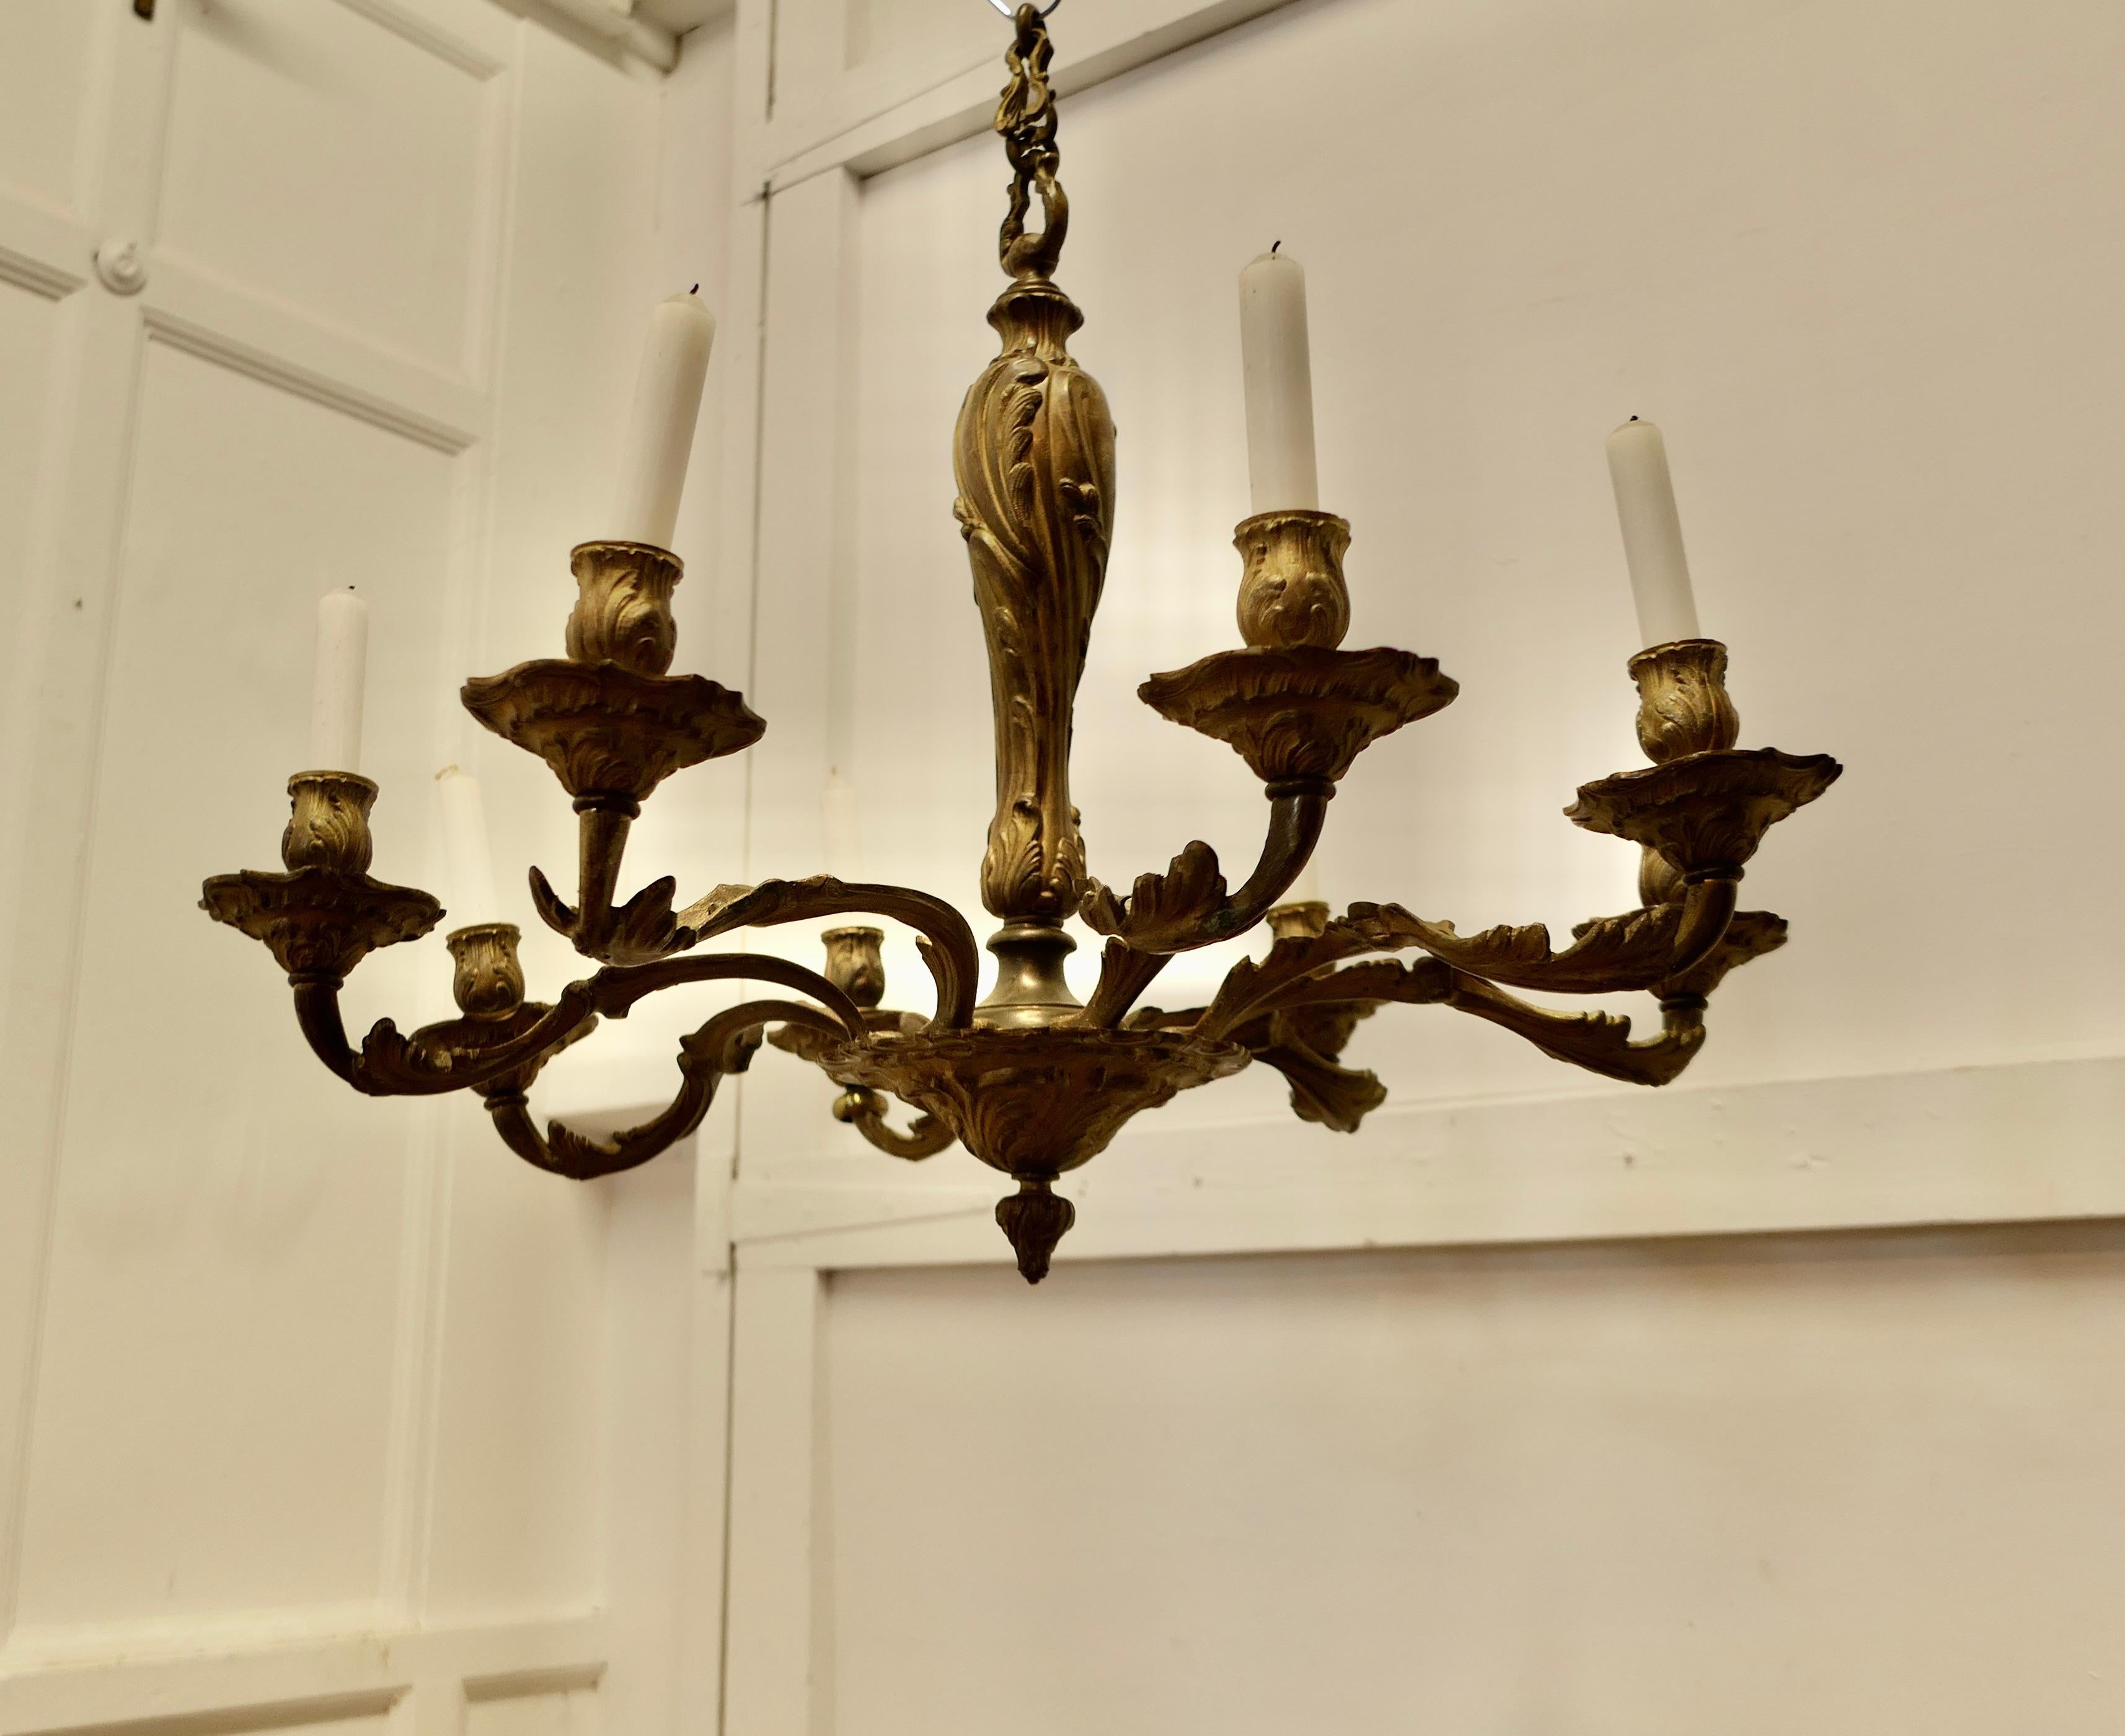 A French Gilded Brass 8 Branch Rococo Chandelier (Candelier)   In Good Condition For Sale In Chillerton, Isle of Wight